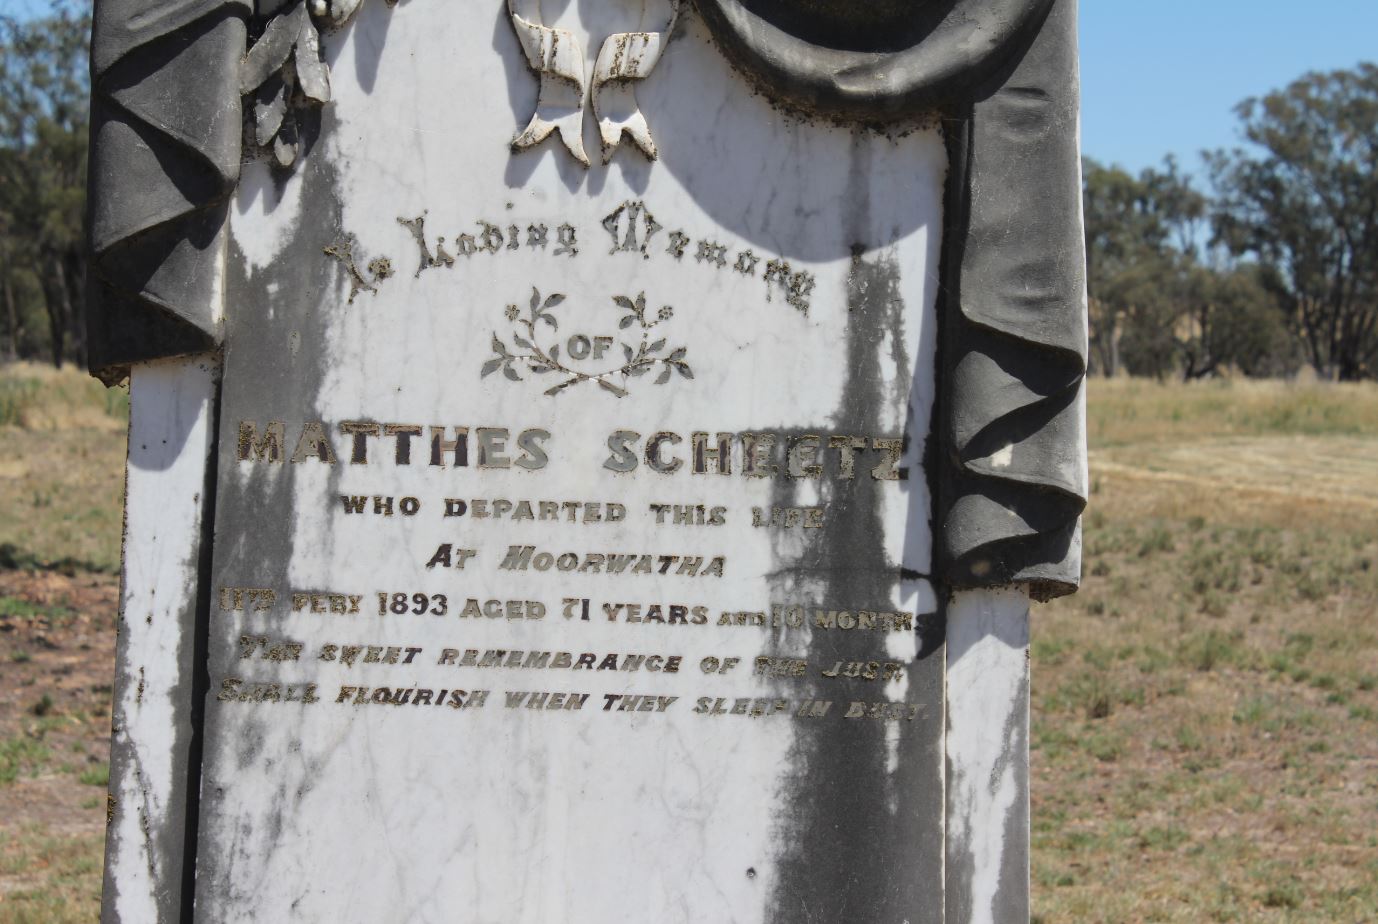 Grave of Mathes Scheetz at Moorwatha (Click to enlarge)